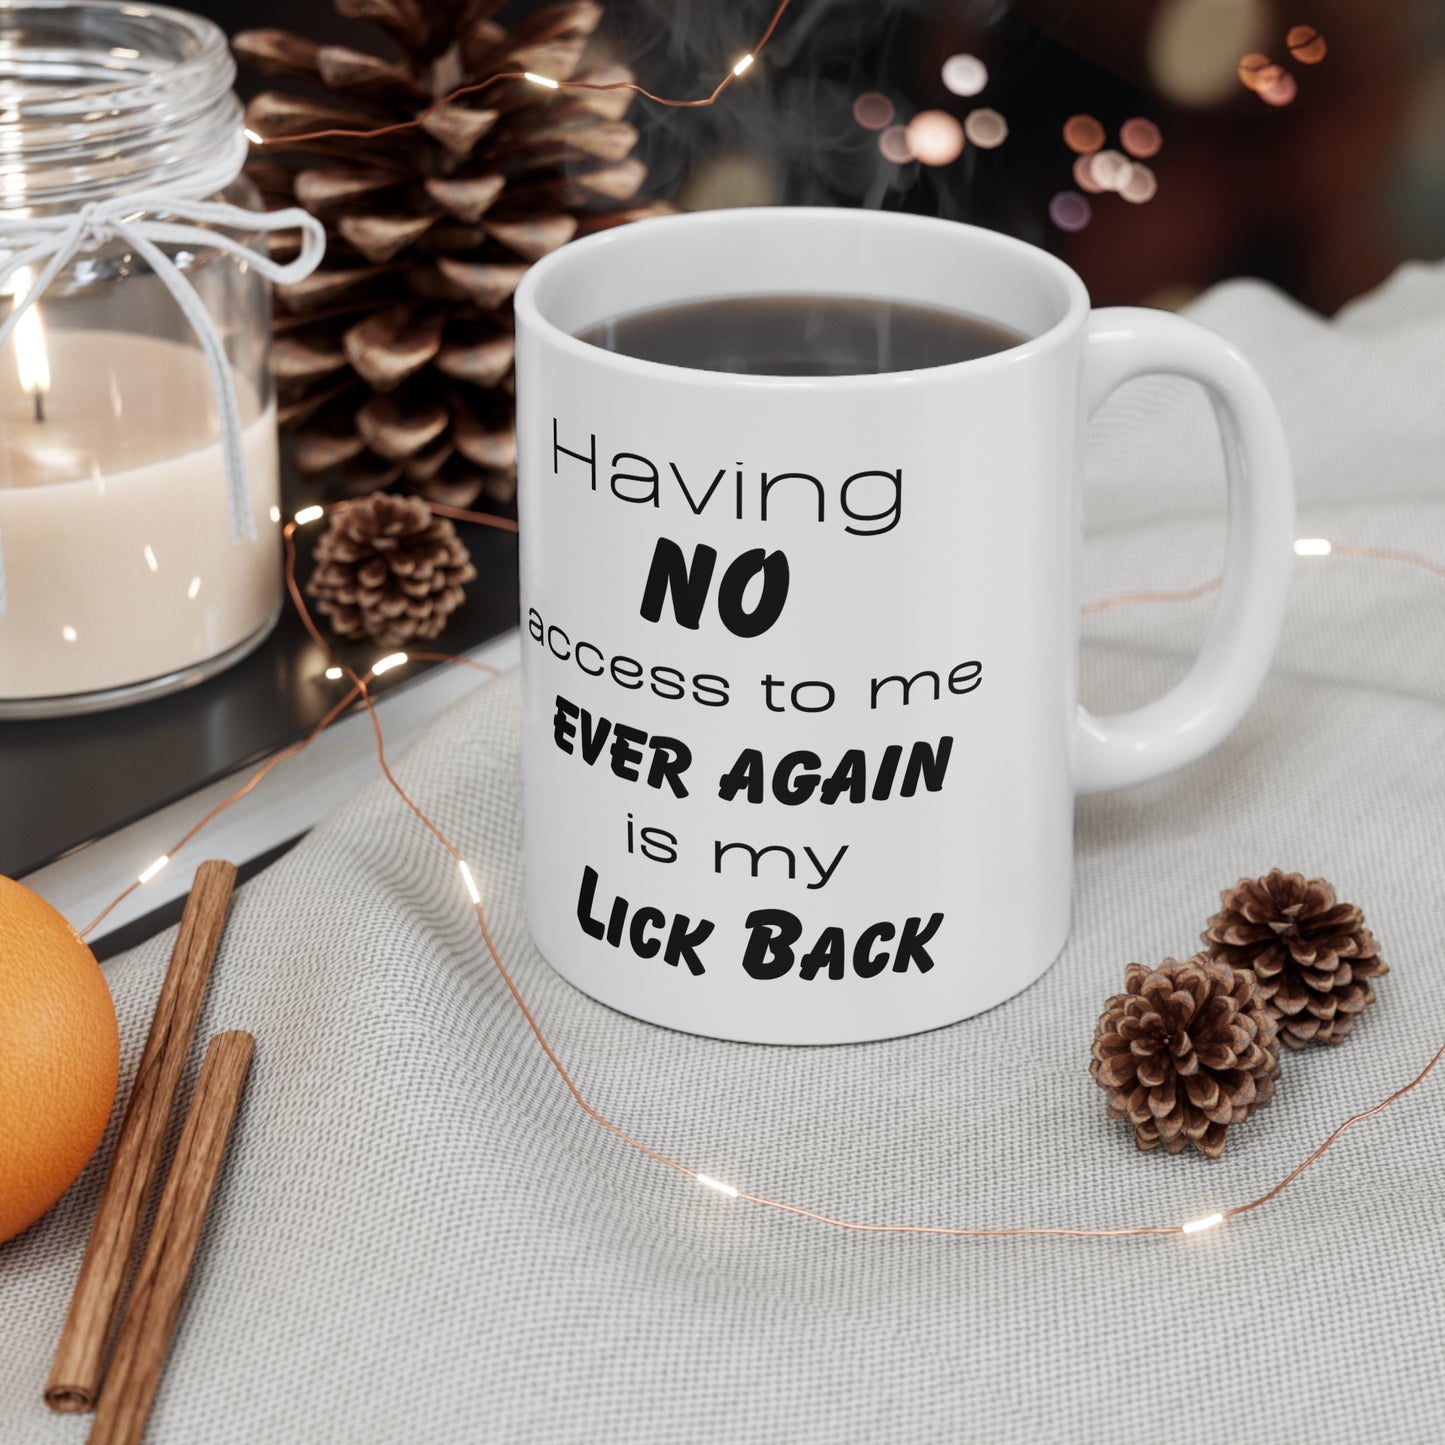 Having no access to me ever again is getting my lick back! Ceramic Mug 11oz